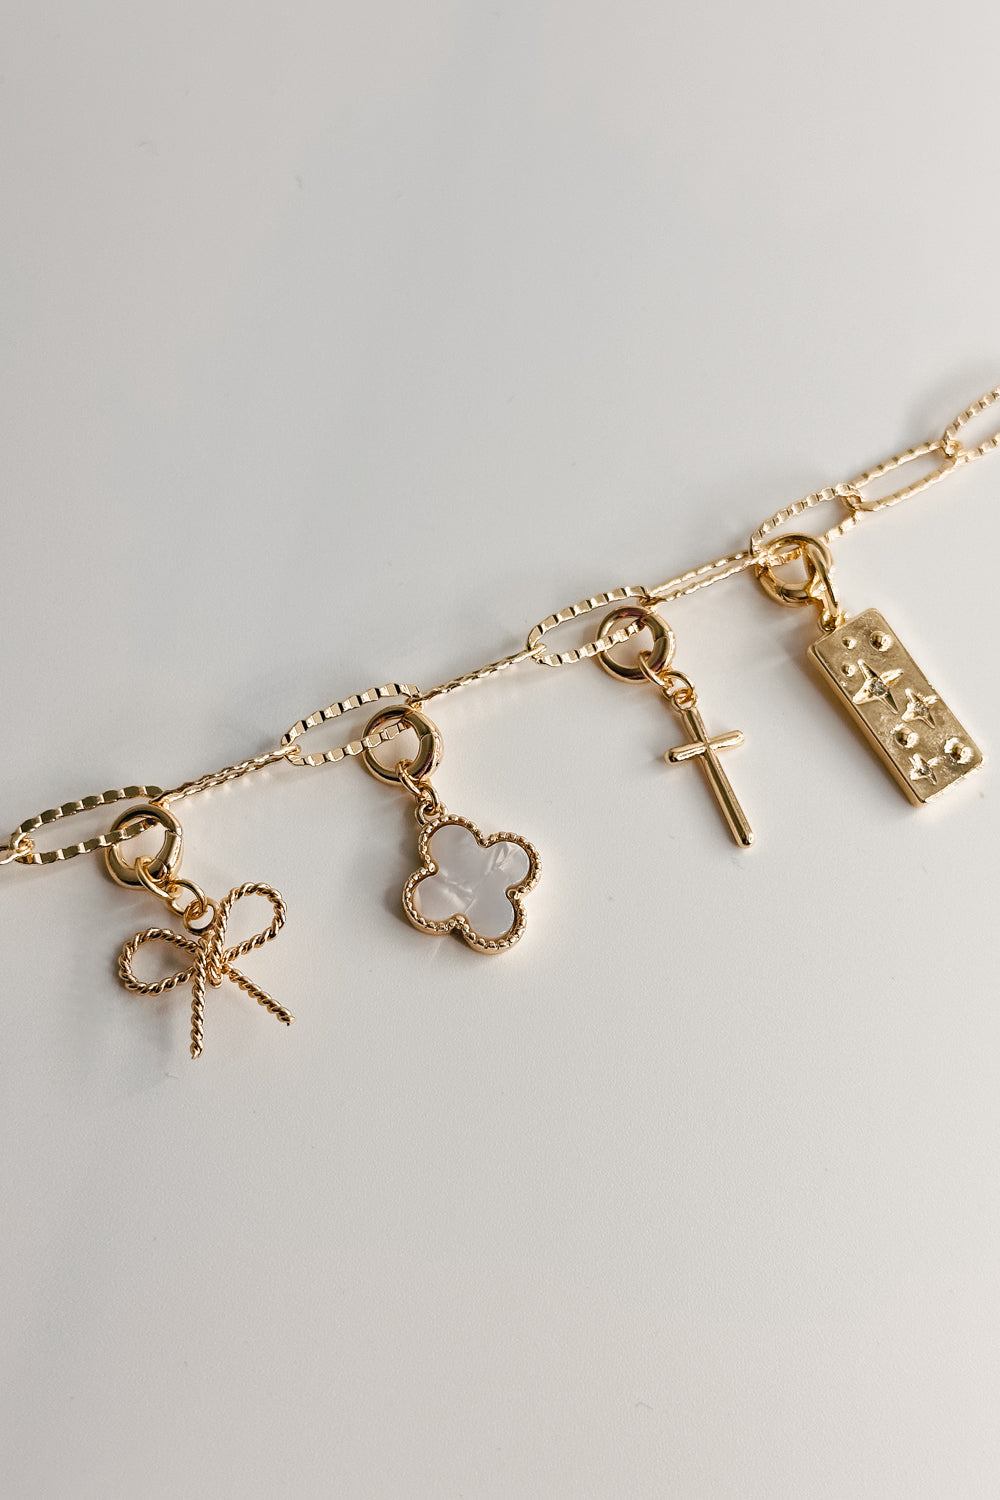 Image shows the Bethany Gold Textured Chain Link Bracelet against a white background. Shown with 4 charms attached to bracelet.